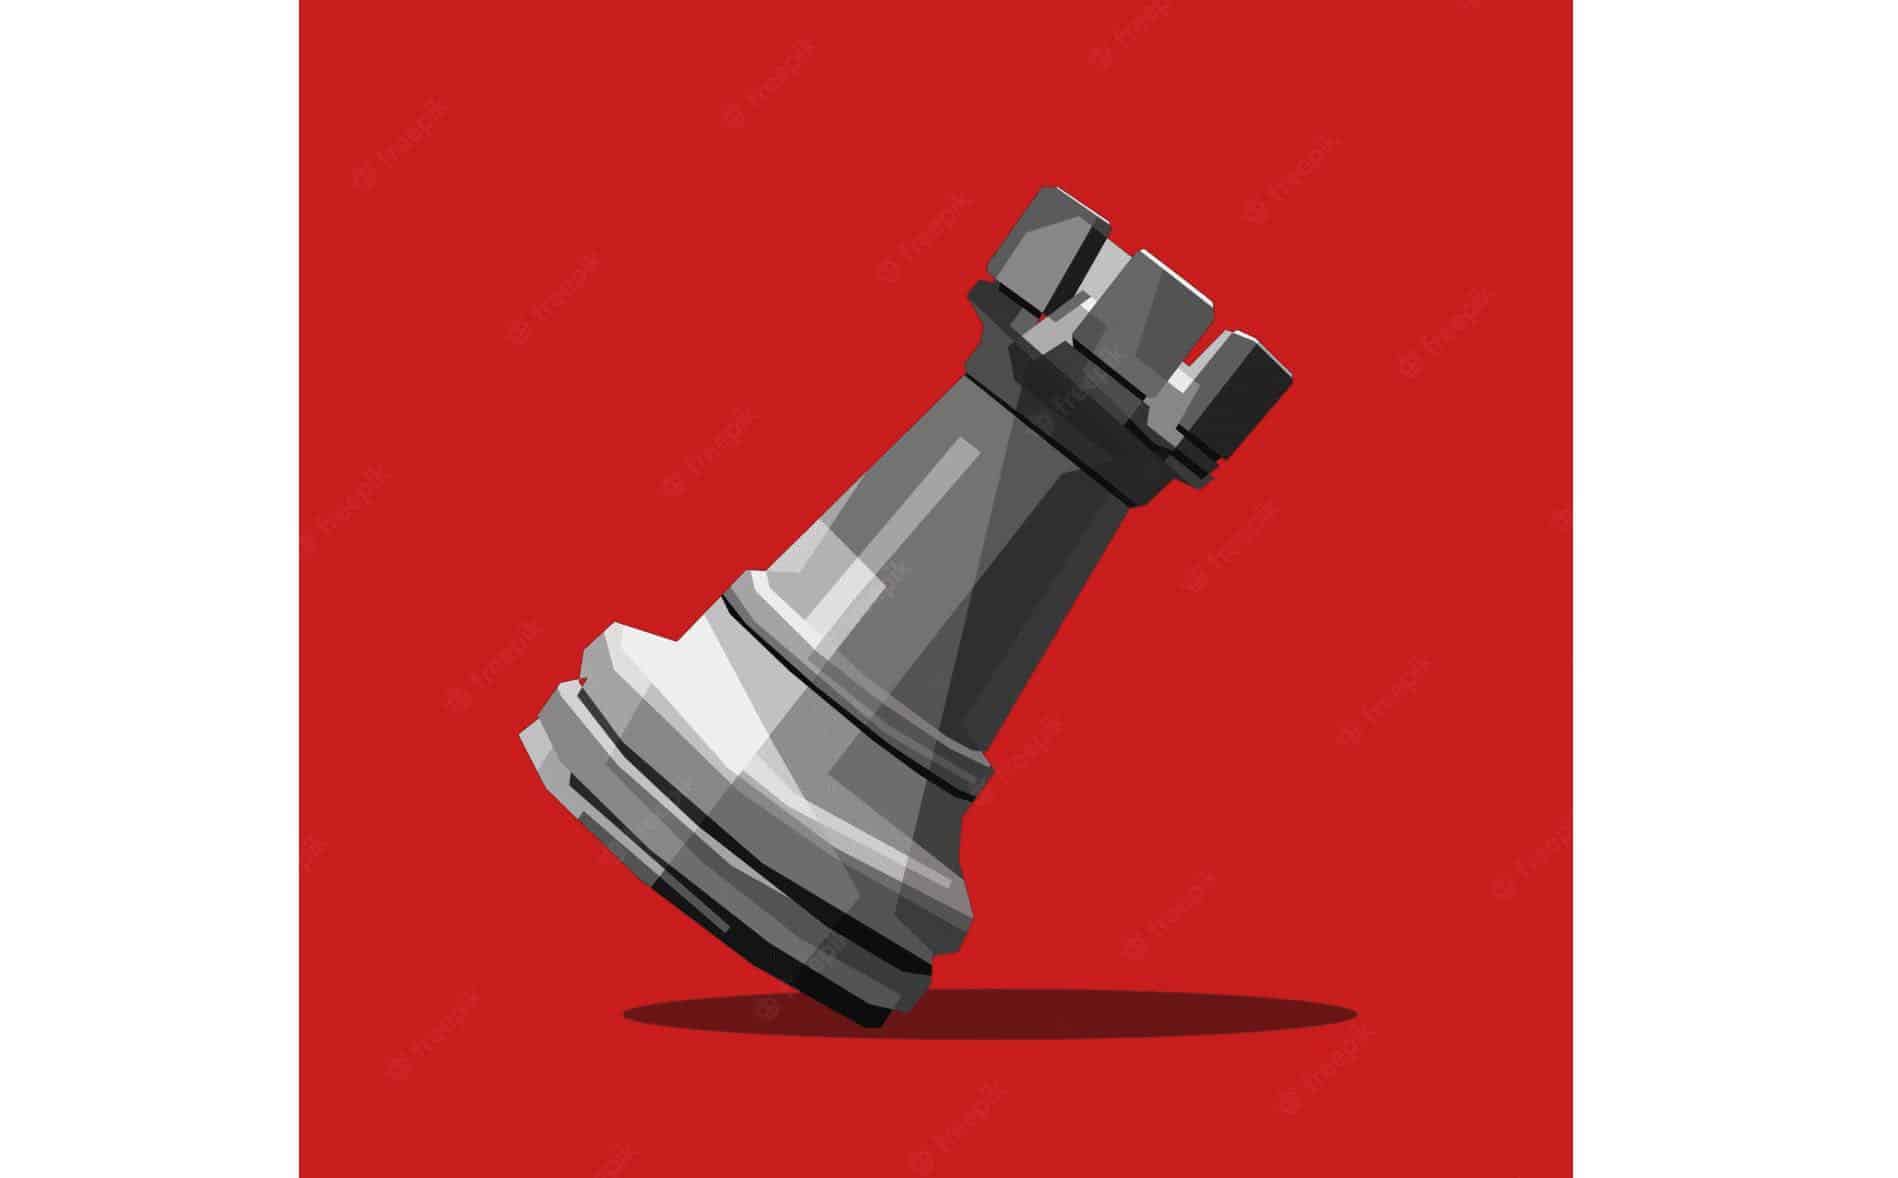 What Is a Chess Engine? Types and Winning Practices Unveiled